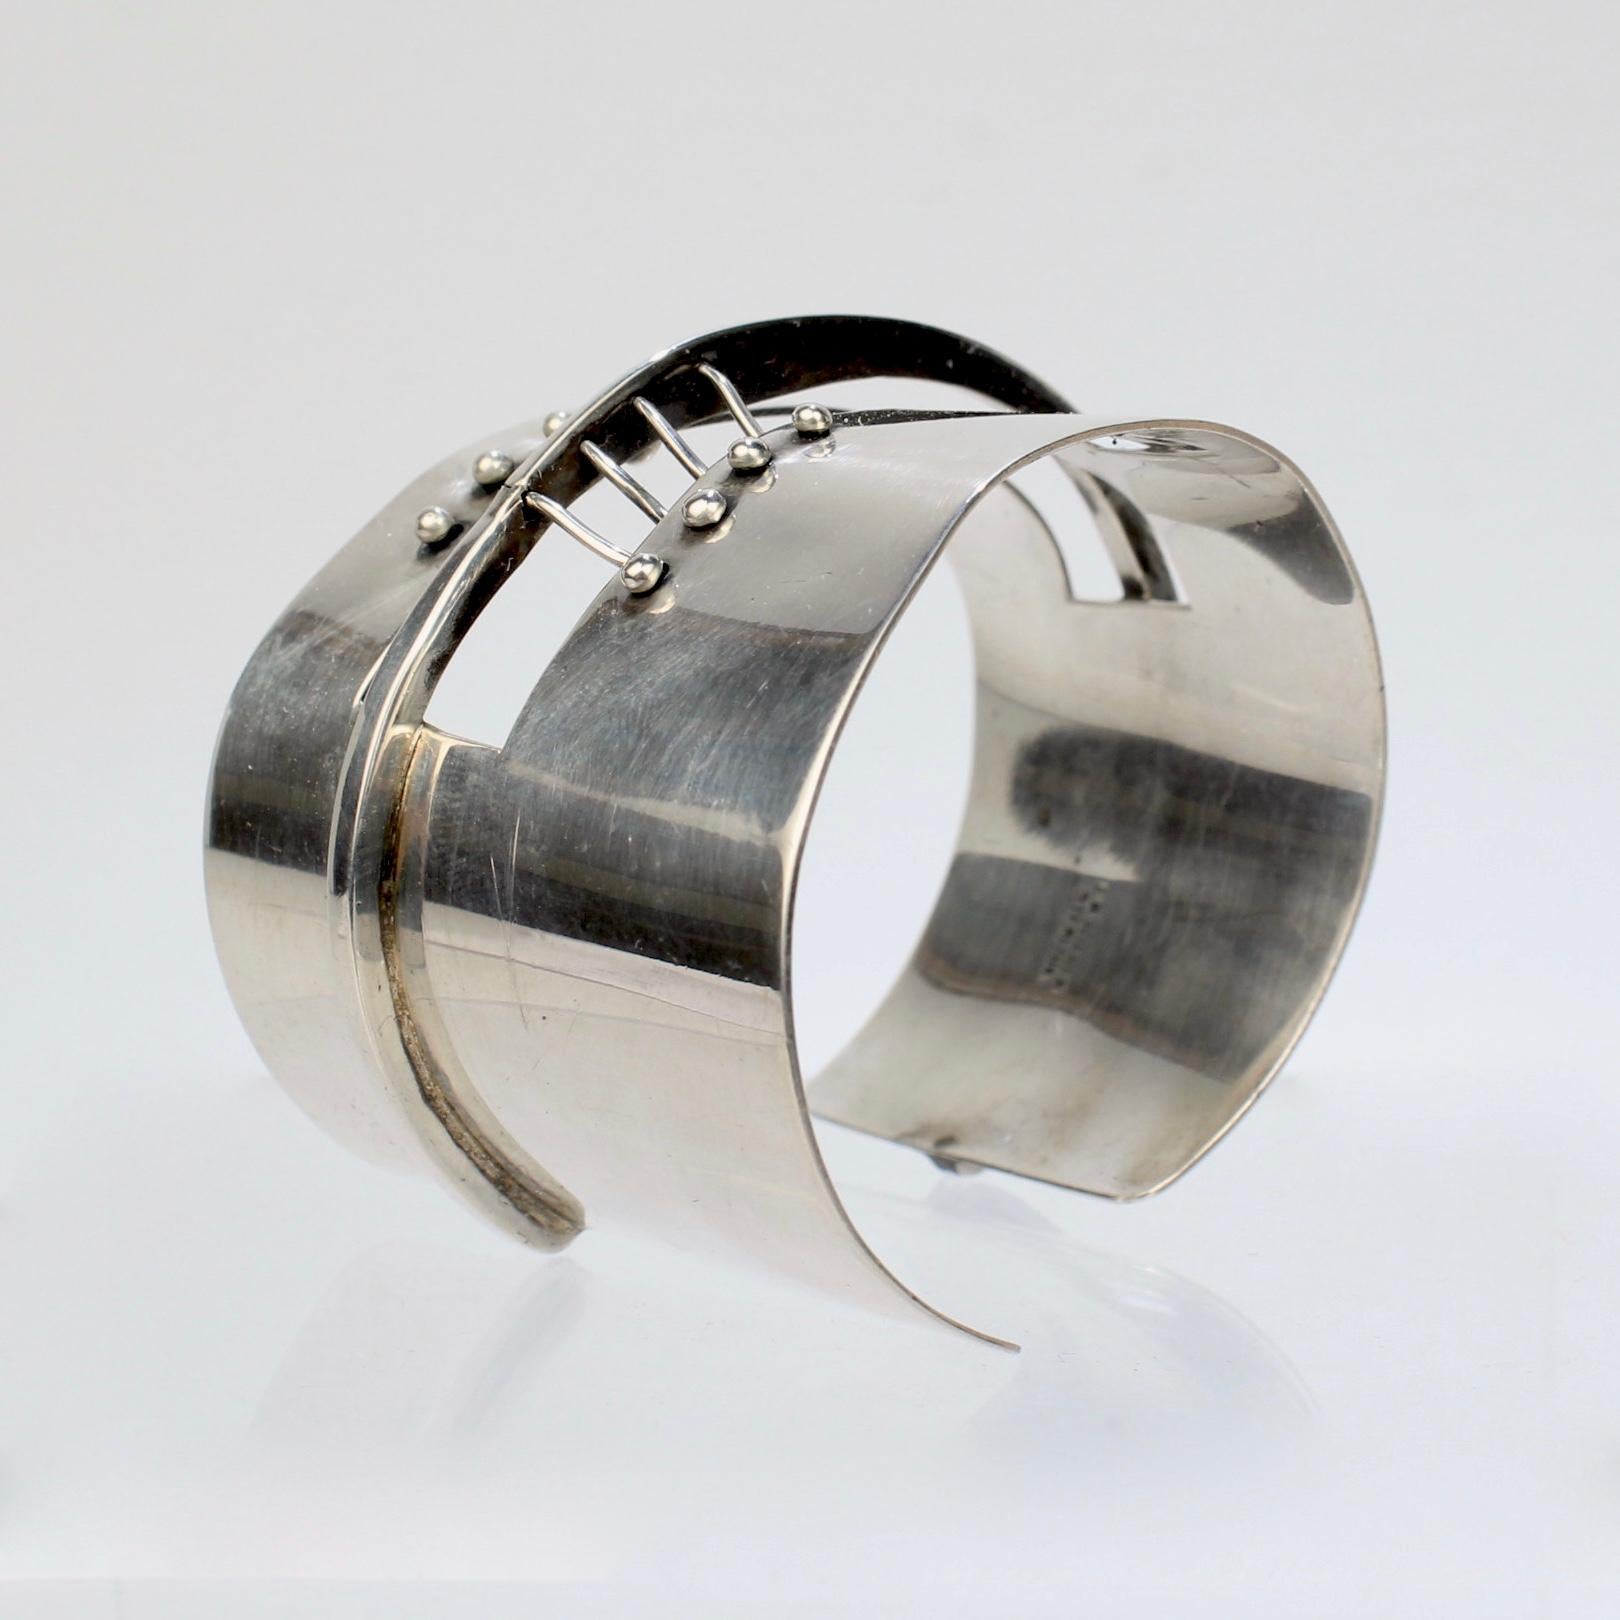 A fantastic cuff bracelet by Ed Wiener.

In sterling silver with openwork to the center and a taper to one side.

Marked: Ed Wiener and Sterling

High level design from one of the top American Modernists!

Interior Width: ca. 140 mm or 5 1/2